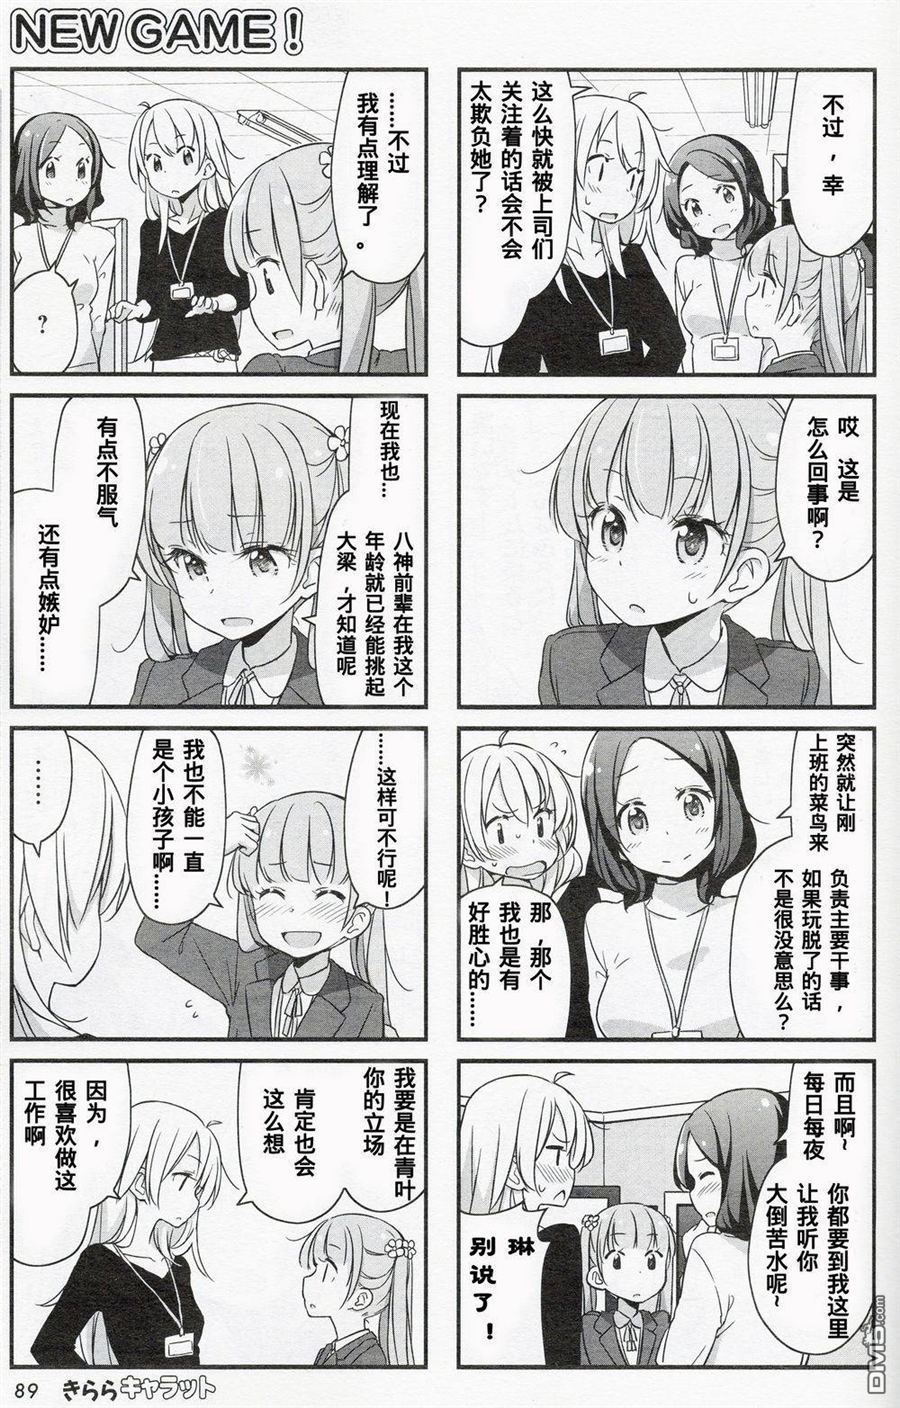 《New Game!》漫画 New Game 11-12集